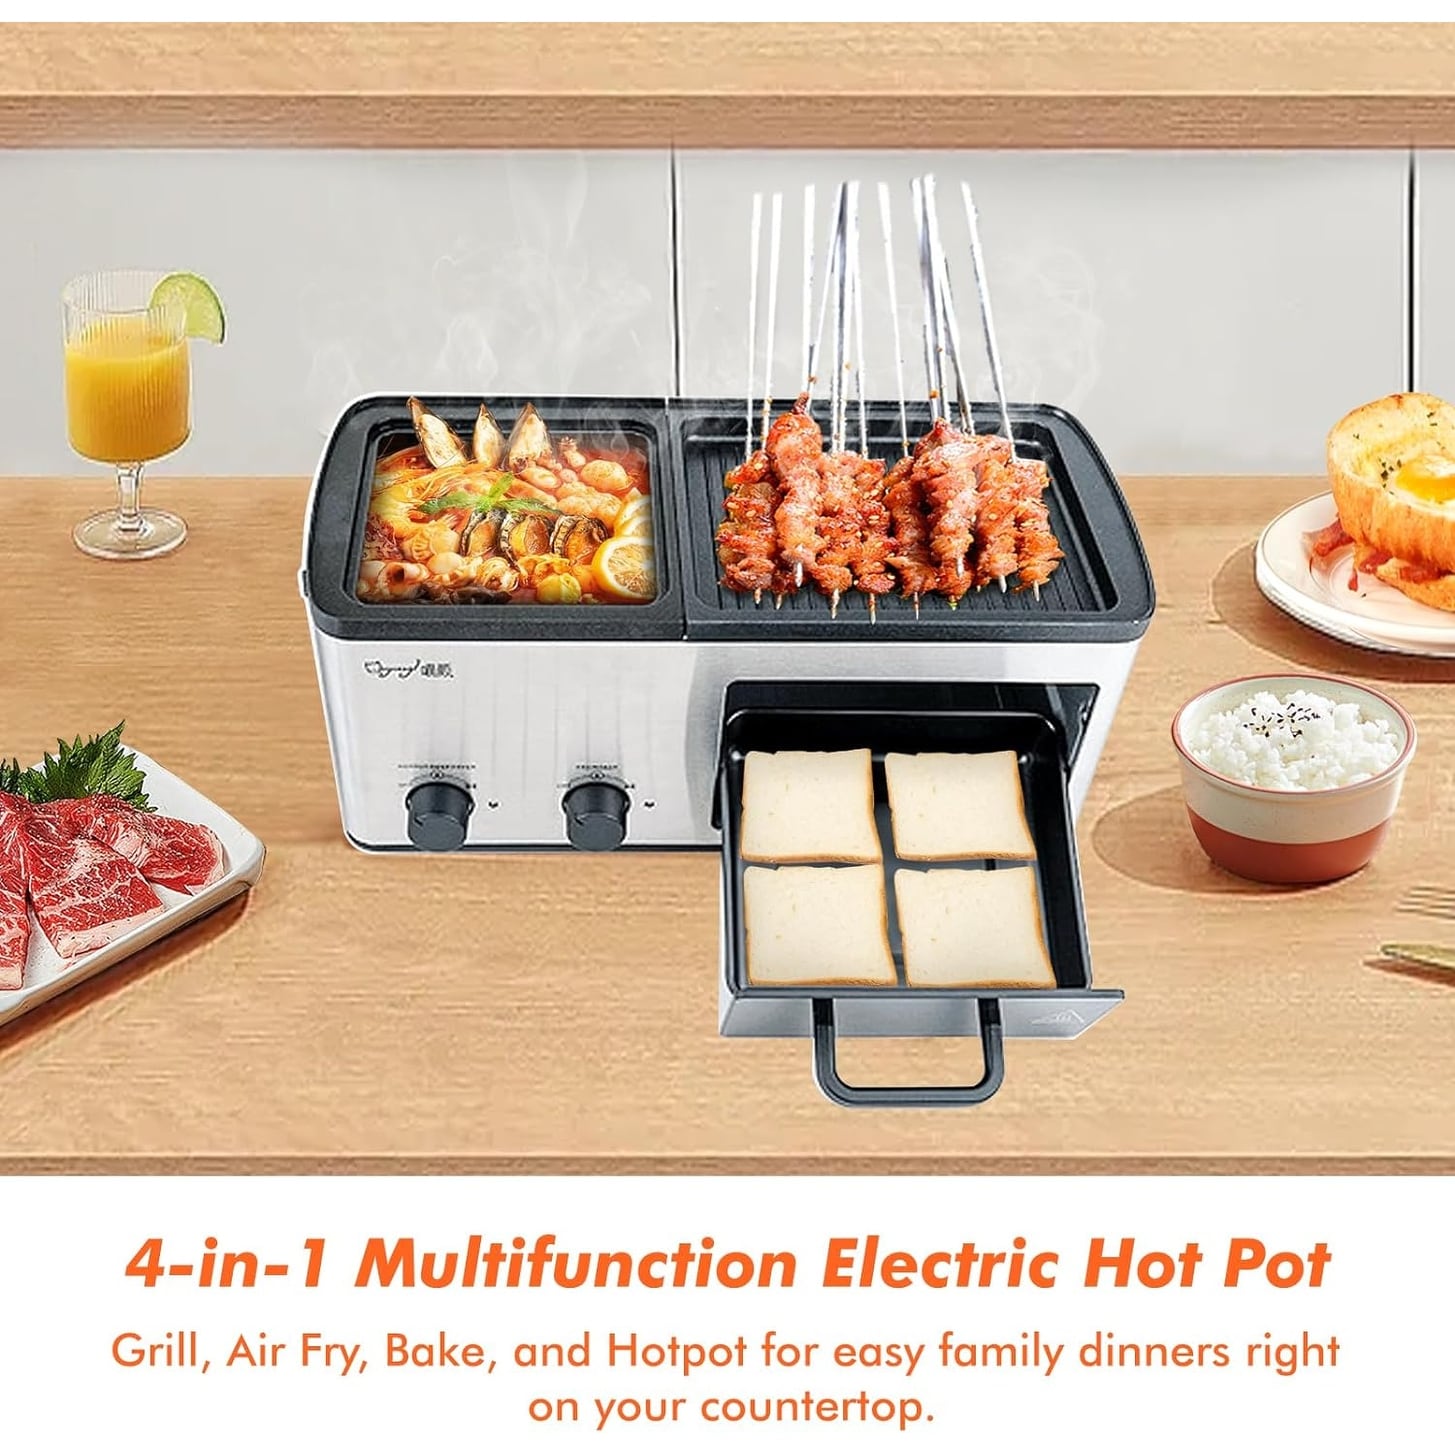 4 in 1 Breakfast Maker Station With Grill, Toast Drawer and Frying